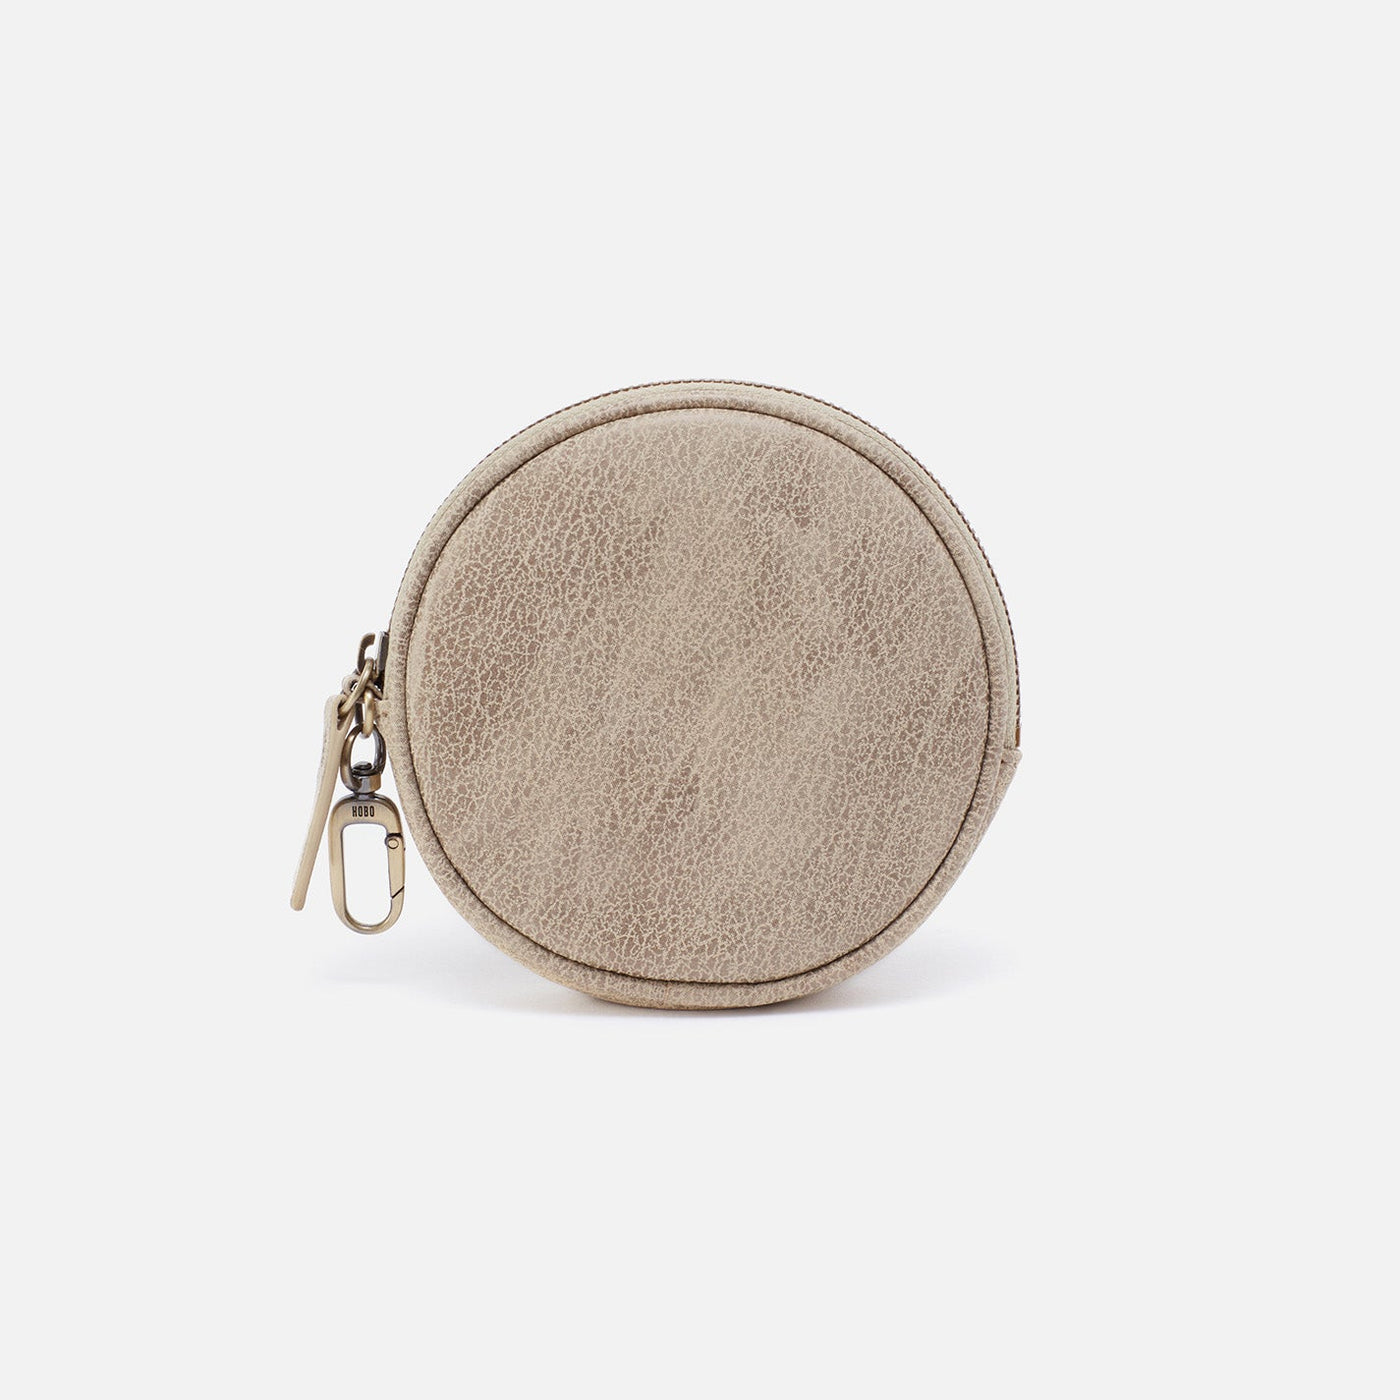 Waxed canvas small pouch / small zipper pouch / coin purse | Treesizeverse